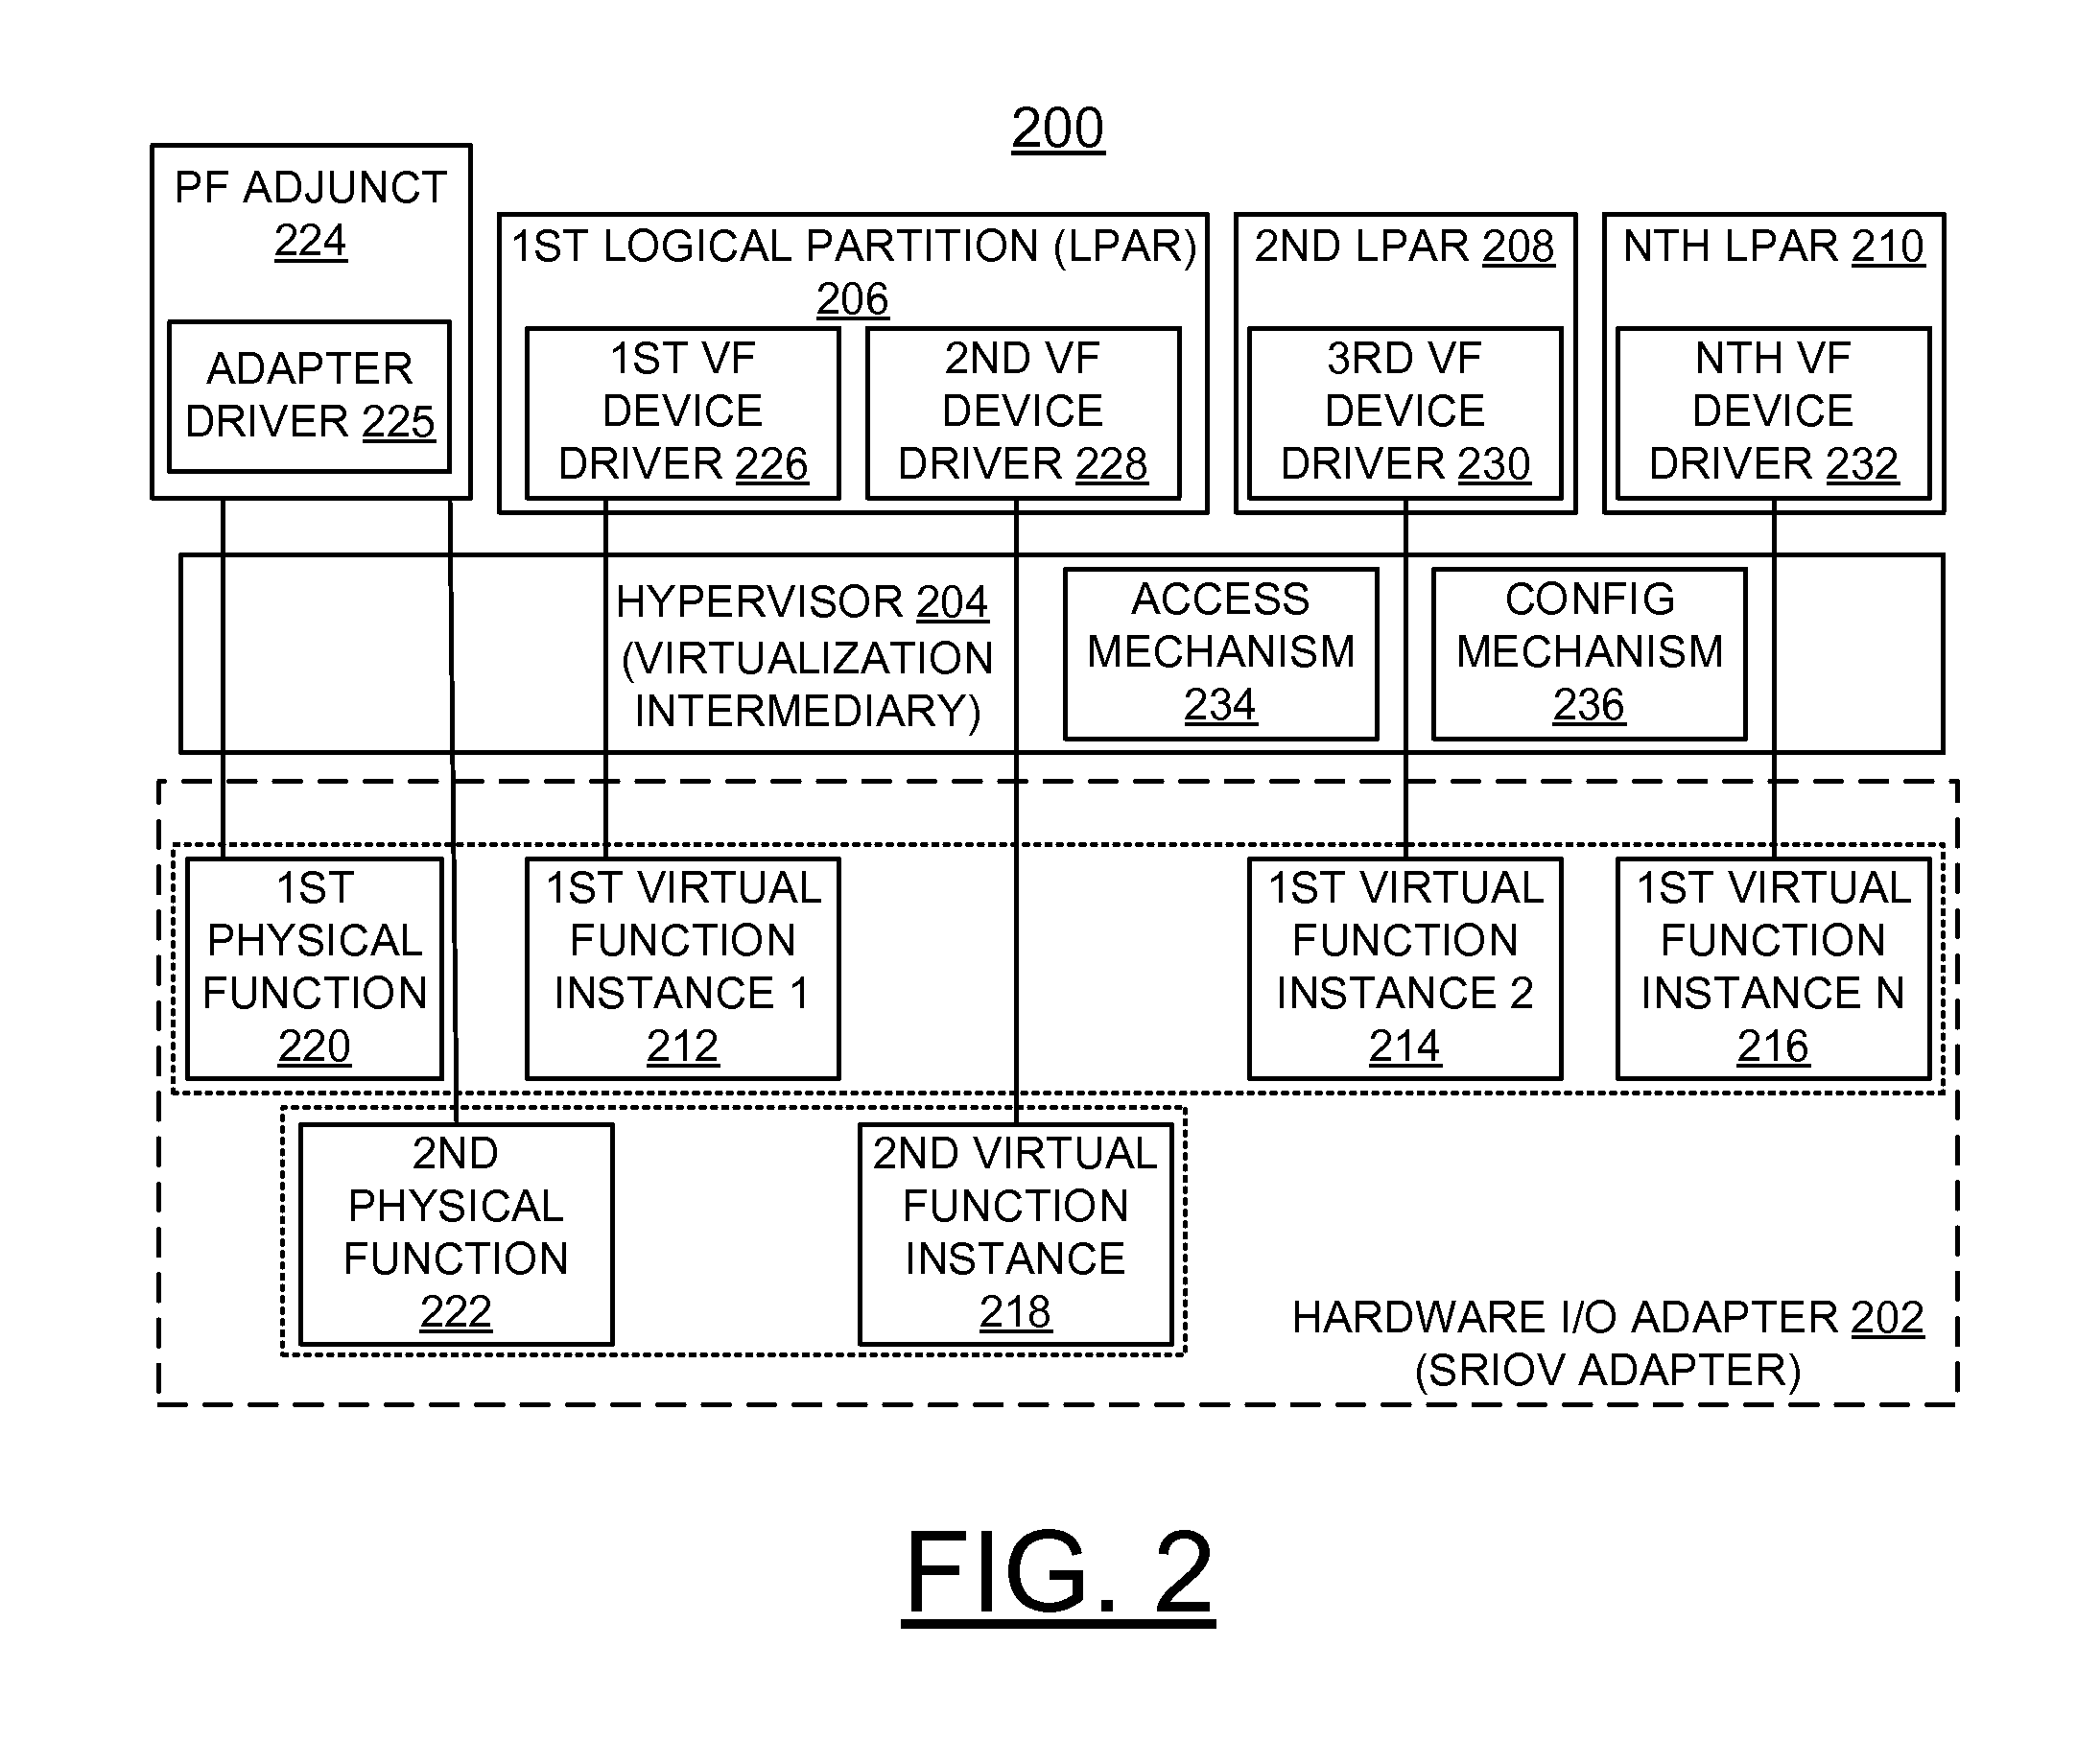 Implementing enhanced error handling of a shared adapter in a virtualized system